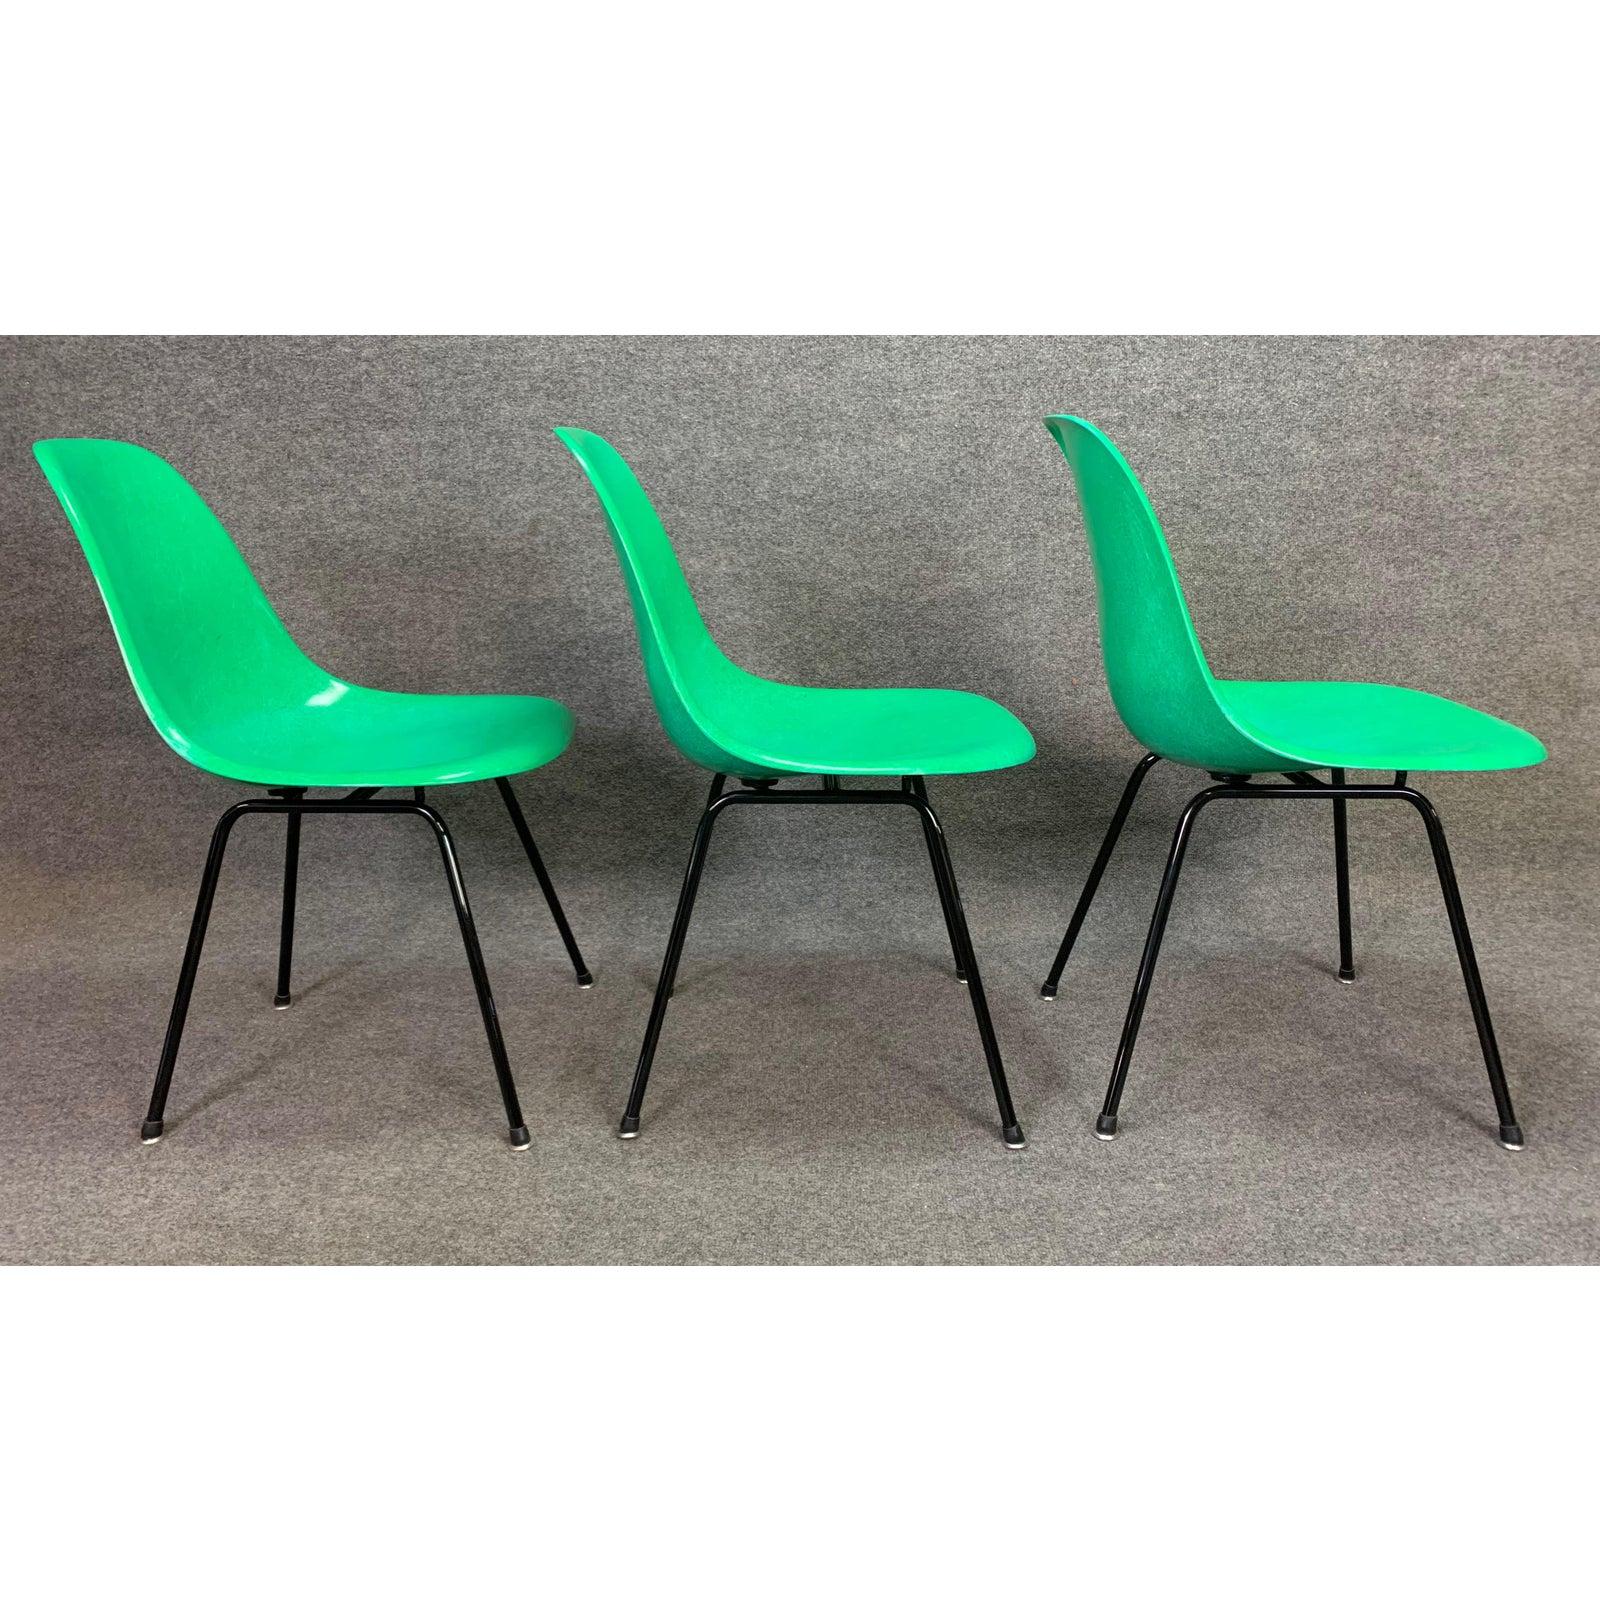 Set of 6 Midcentury DSX Fiberglass Chairs by Charles Eames for Herman Miller 4